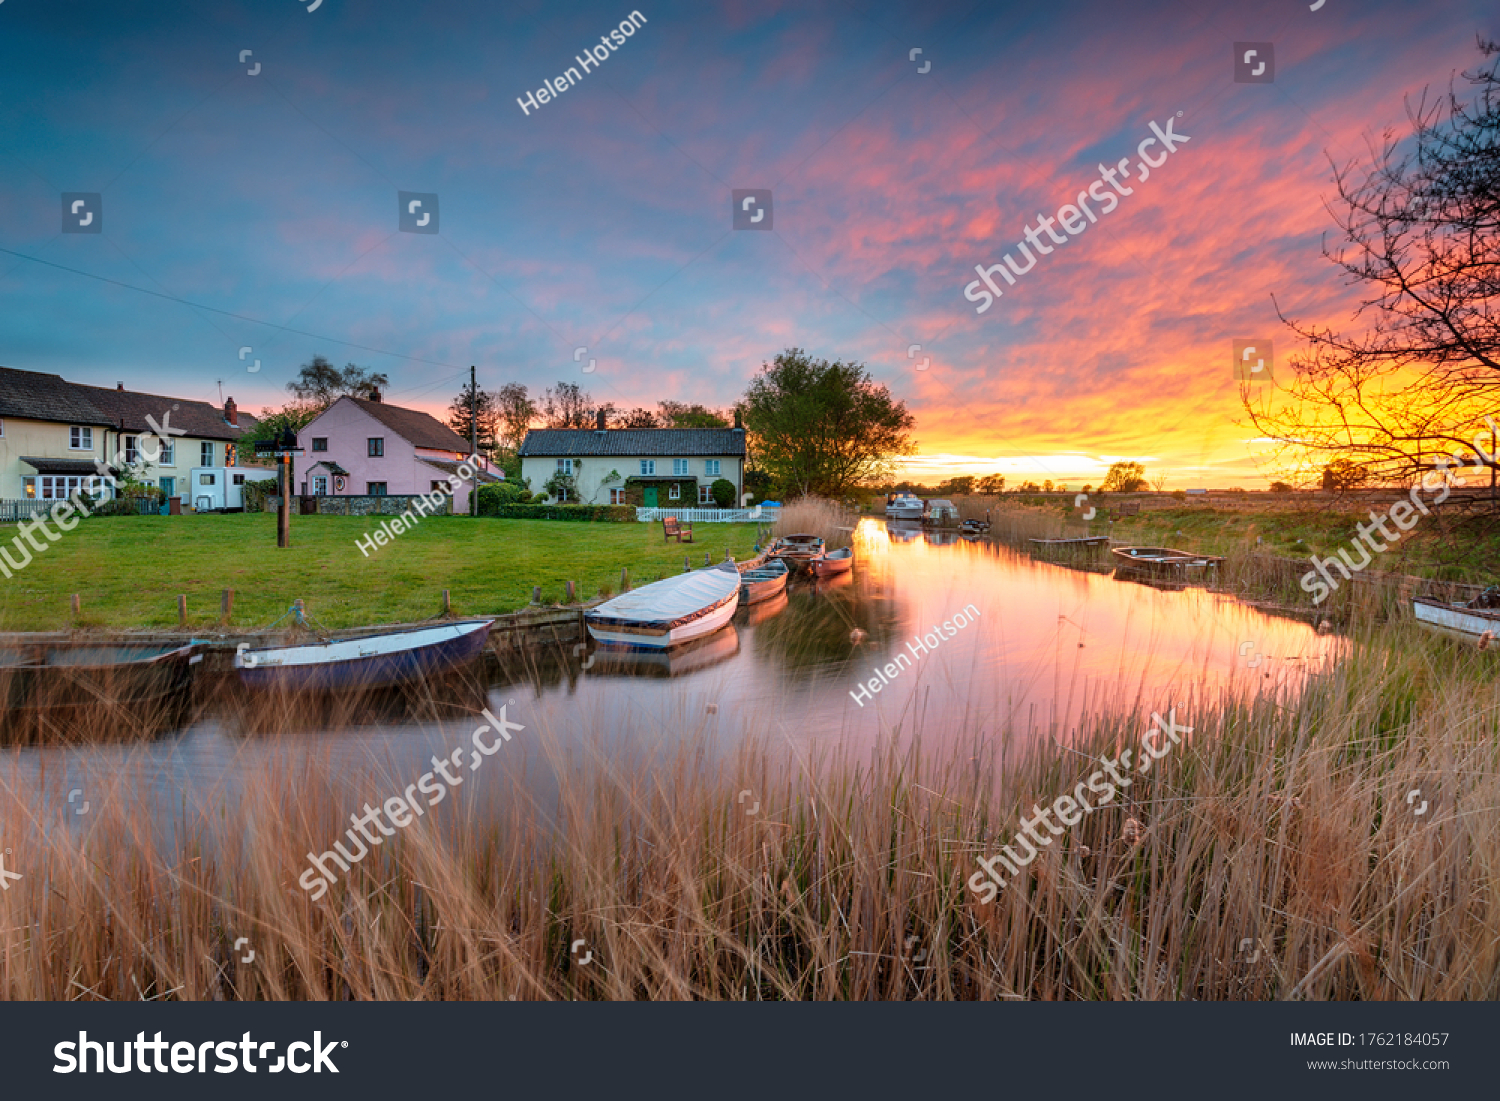 Stunning sunset over the village green and boats on the river at West Somerton in the Norfolk Broads #1762184057